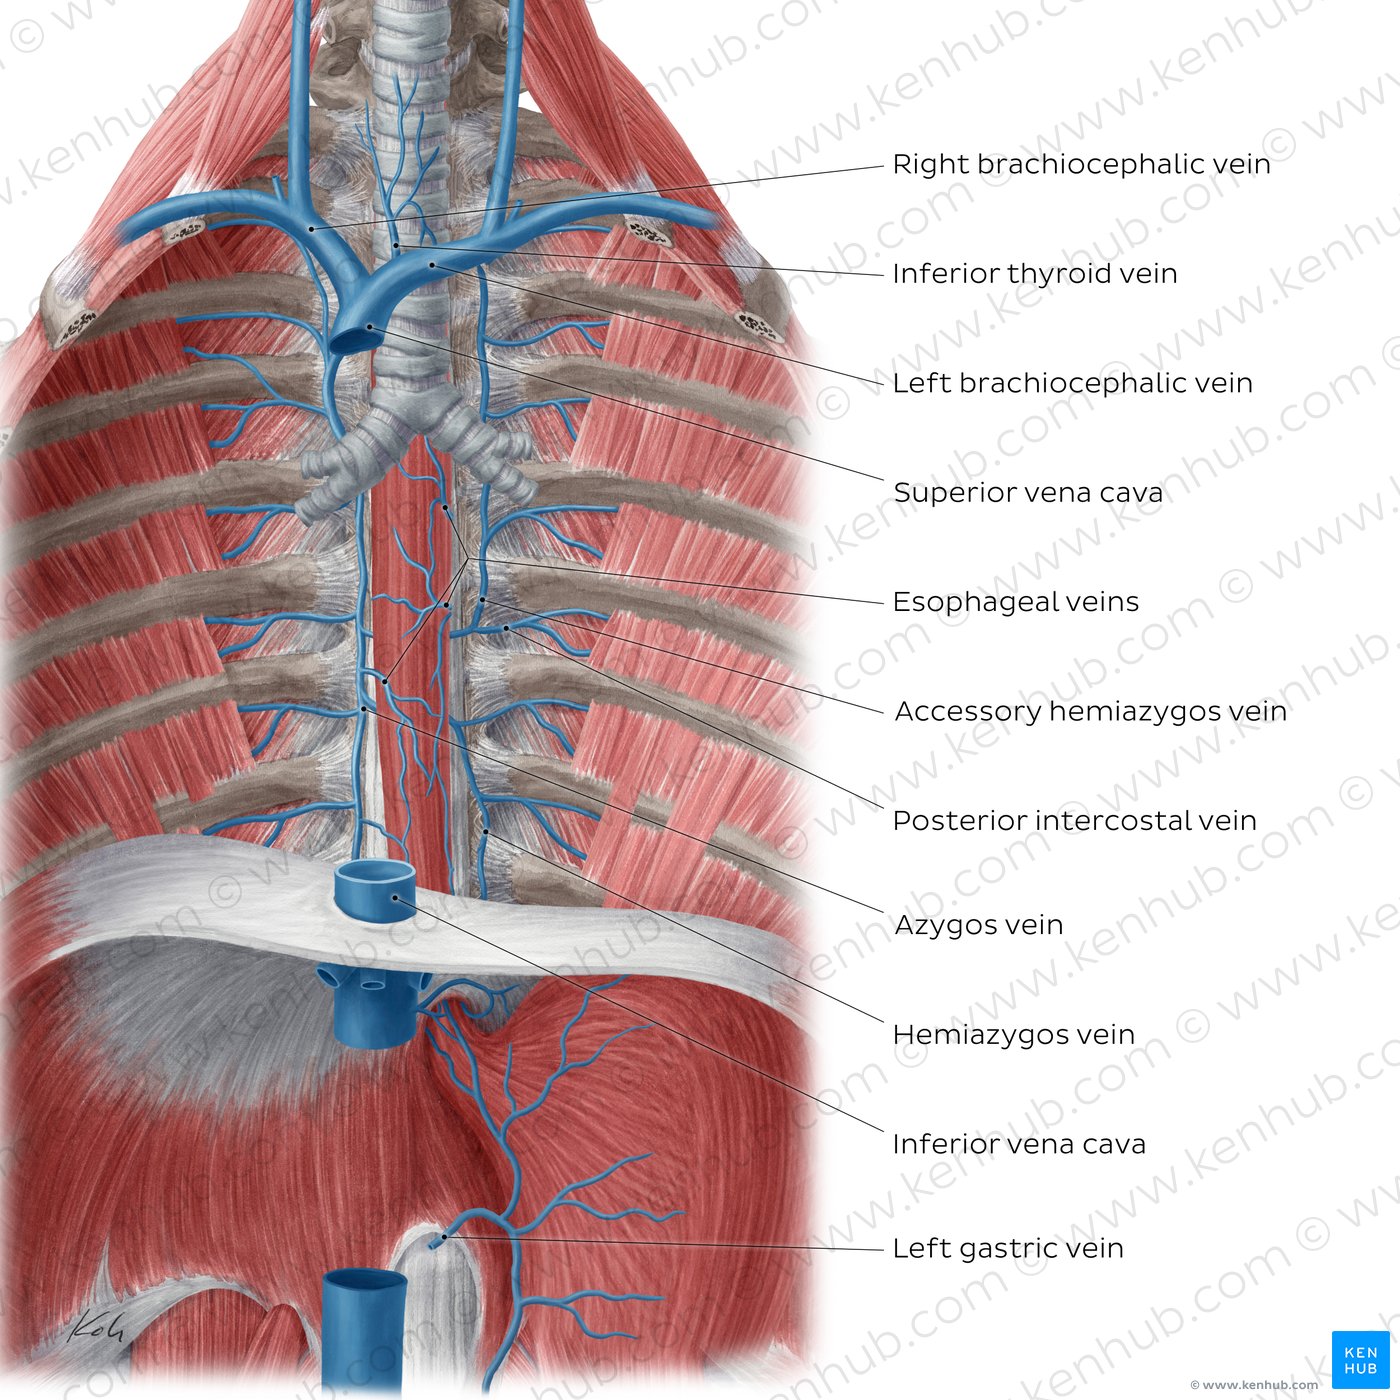 Veins of the esophagus (anterior view)